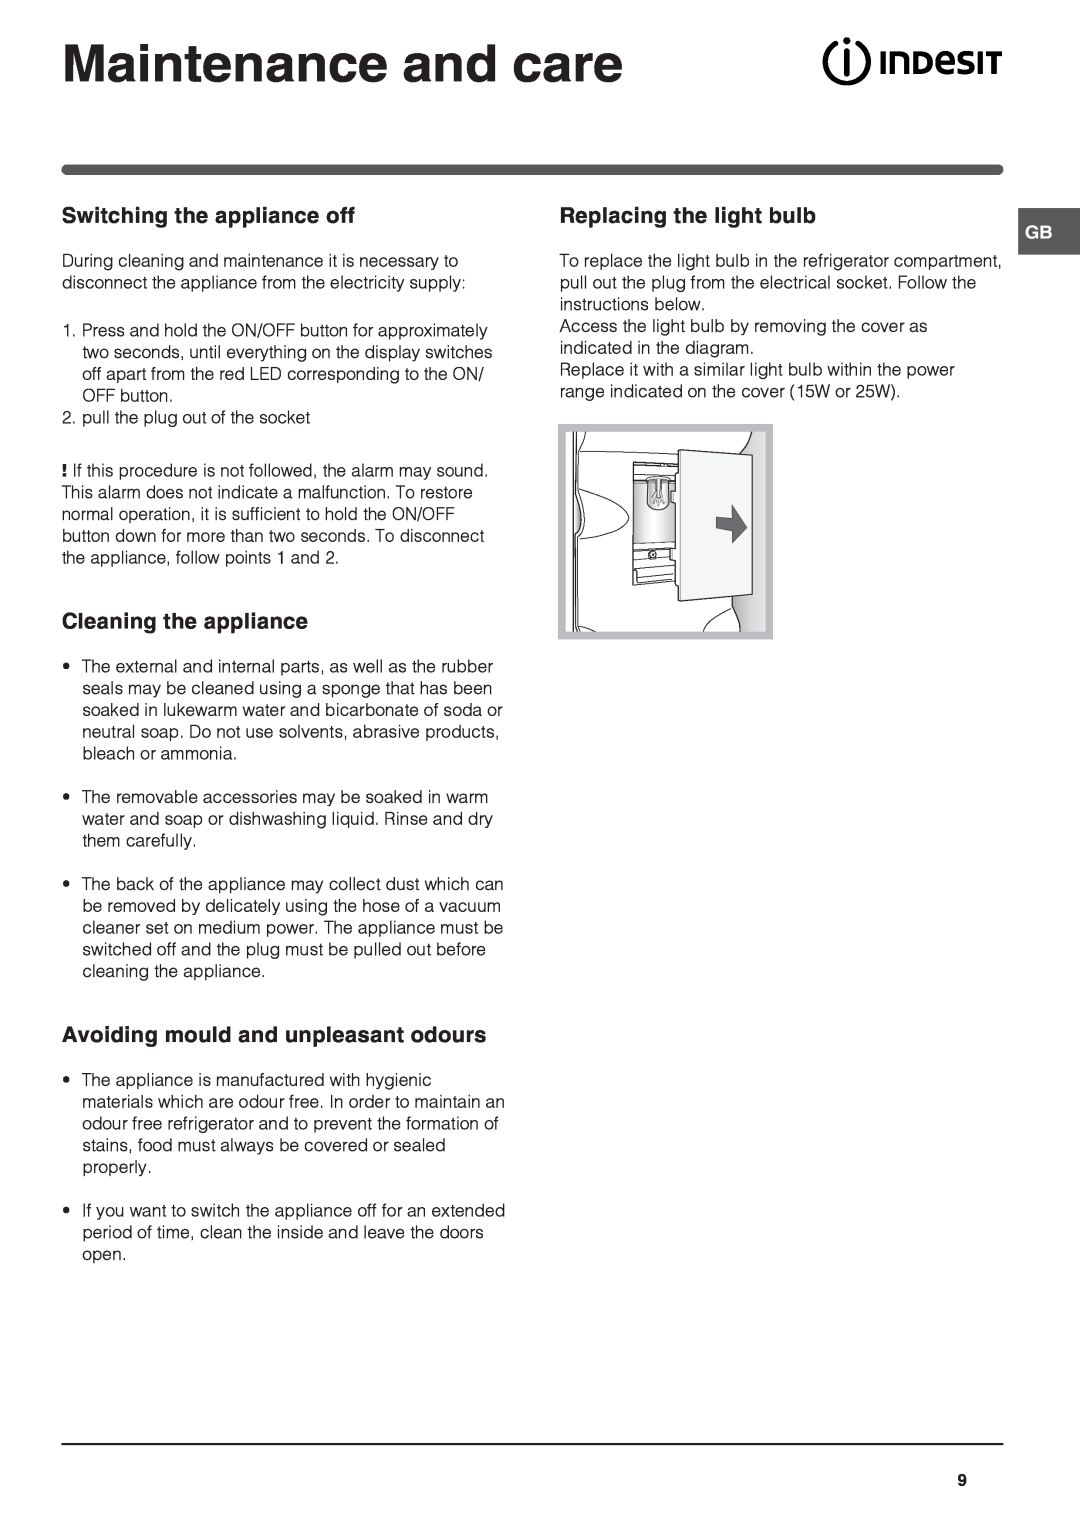 Indesit Refrigerator Maintenance and care, Switching the appliance off, Cleaning the appliance, Replacing the light bulb 